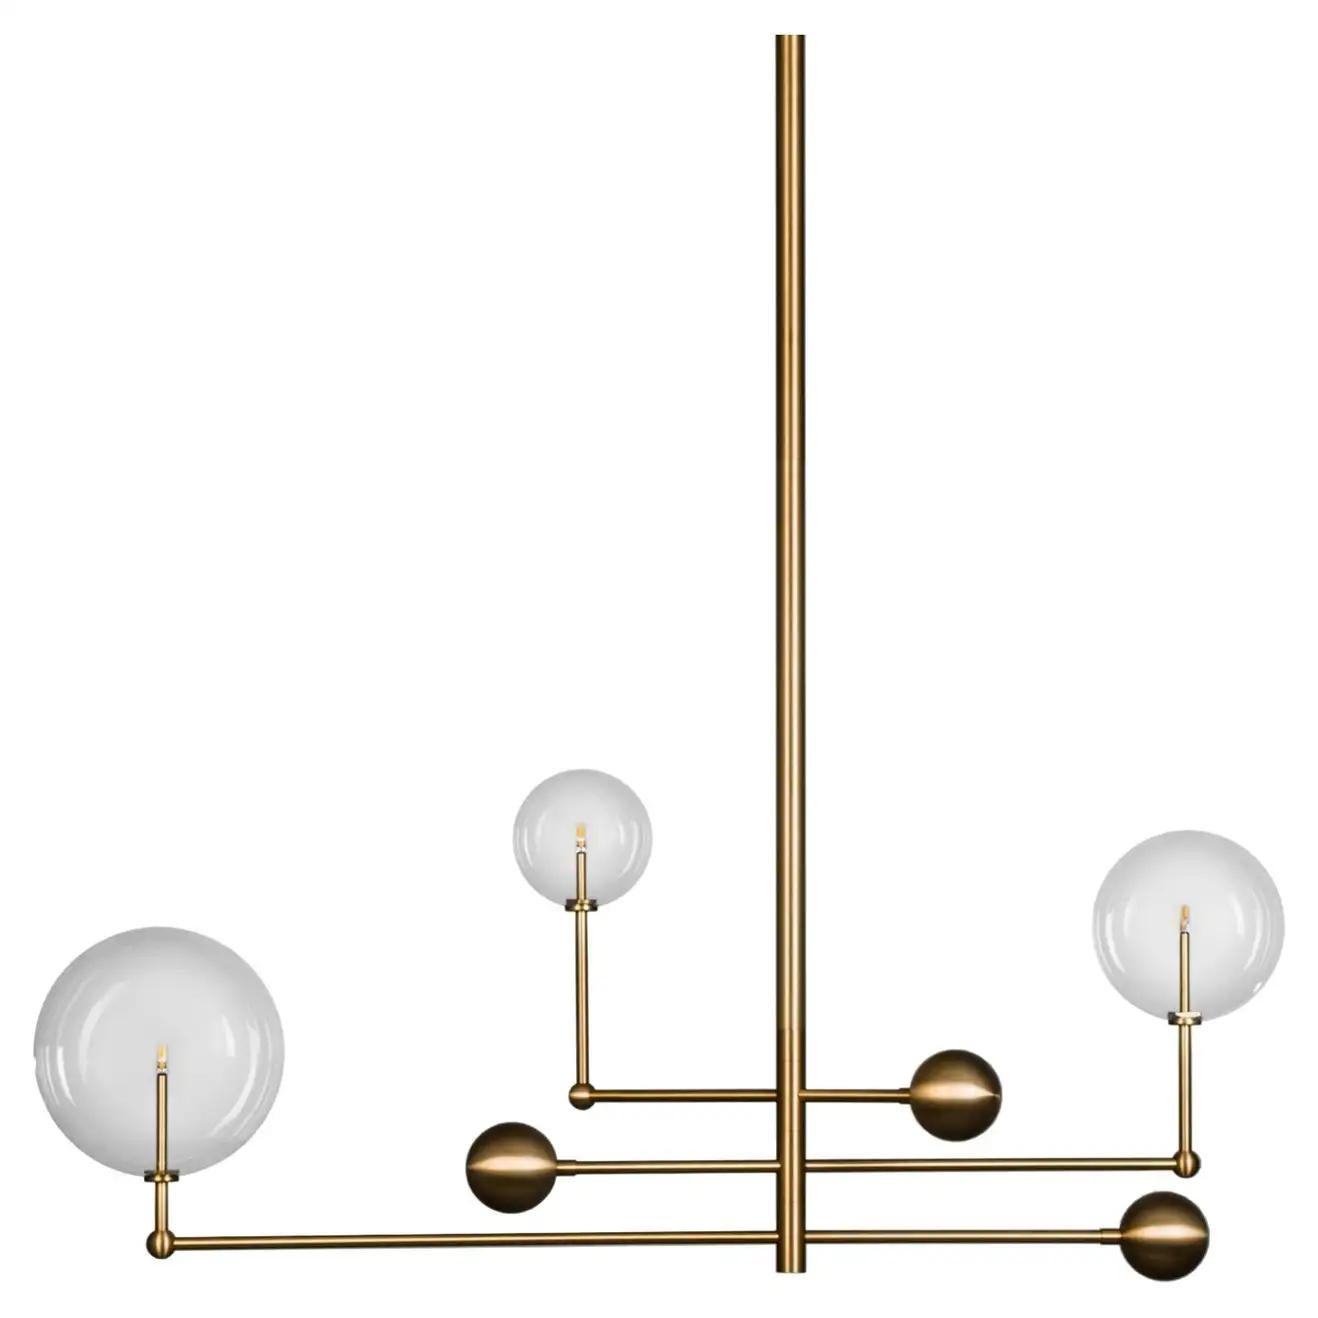 Universe brass chandelier by Schwung.
Dimensions: D 25 x W 128.2 x H 178 cm.
Materials: Solid brass, hand-blown glass globes.
Finish: solid natural brass.
Also available in finishes: polished nickel or black gunmetal. 
All our lamps can be